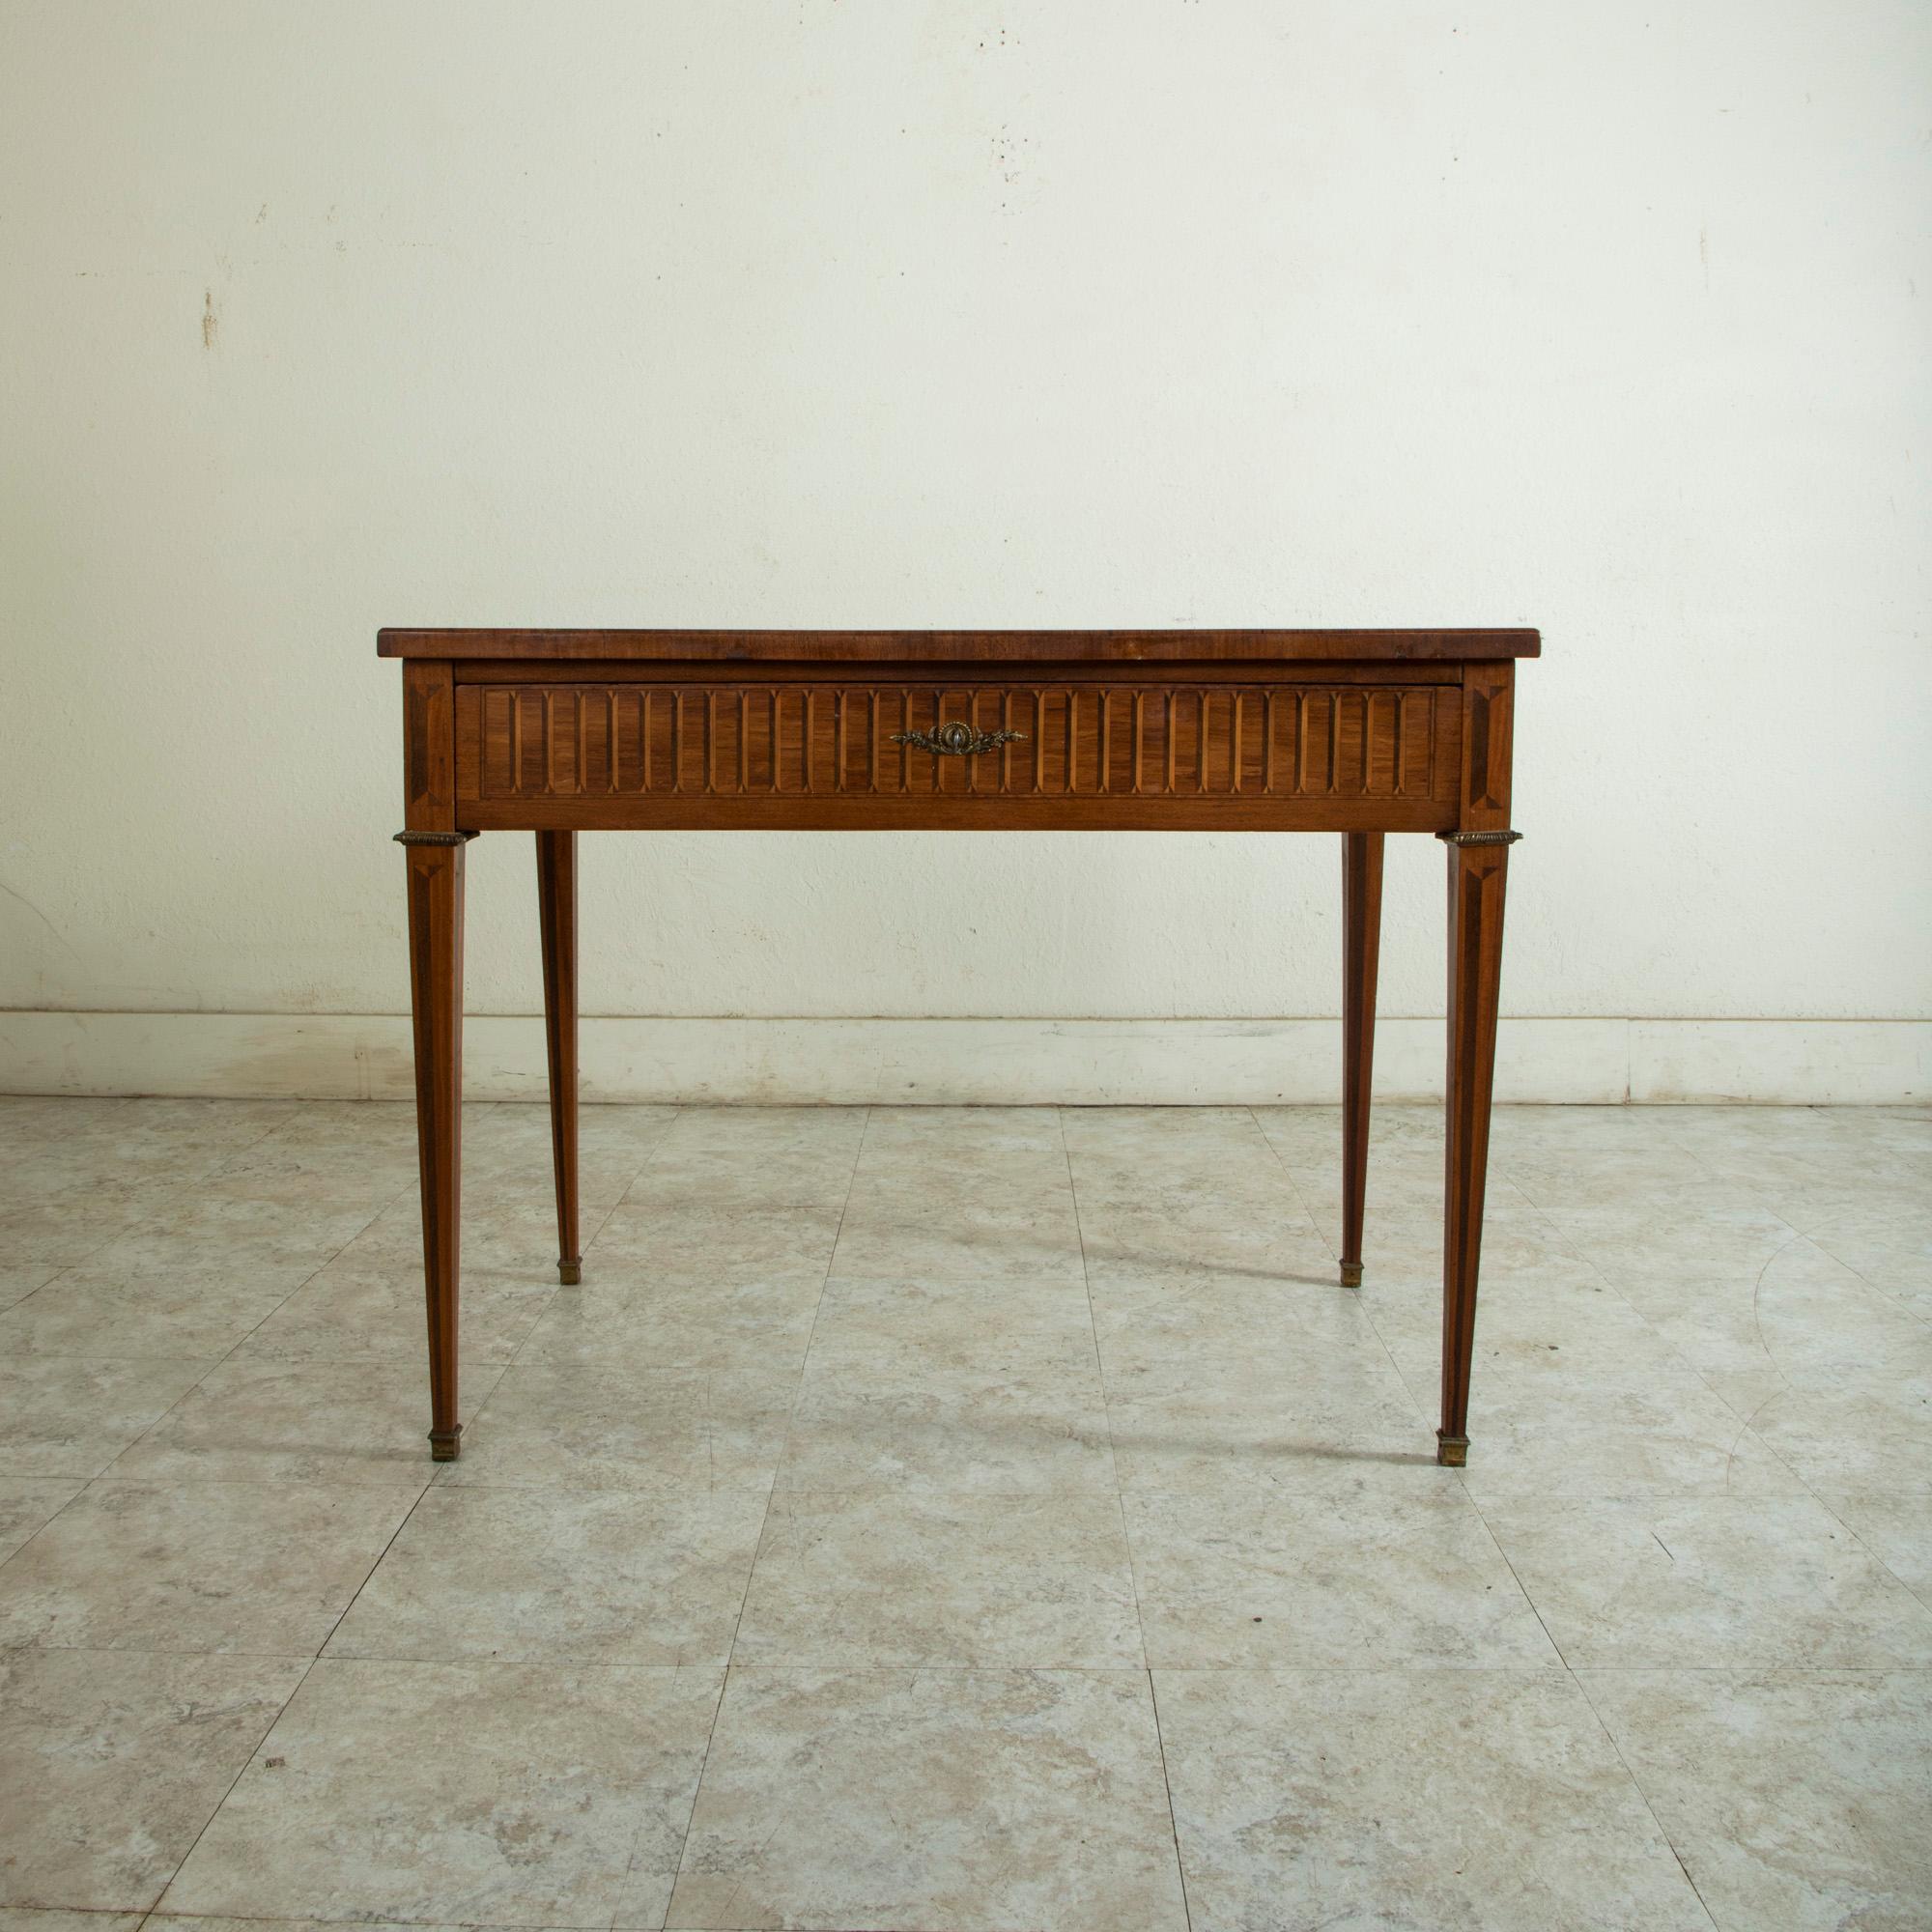 Ebonized Late 19th Century French Louis XVI Style Rosewood Marquetry Desk, Writing Table